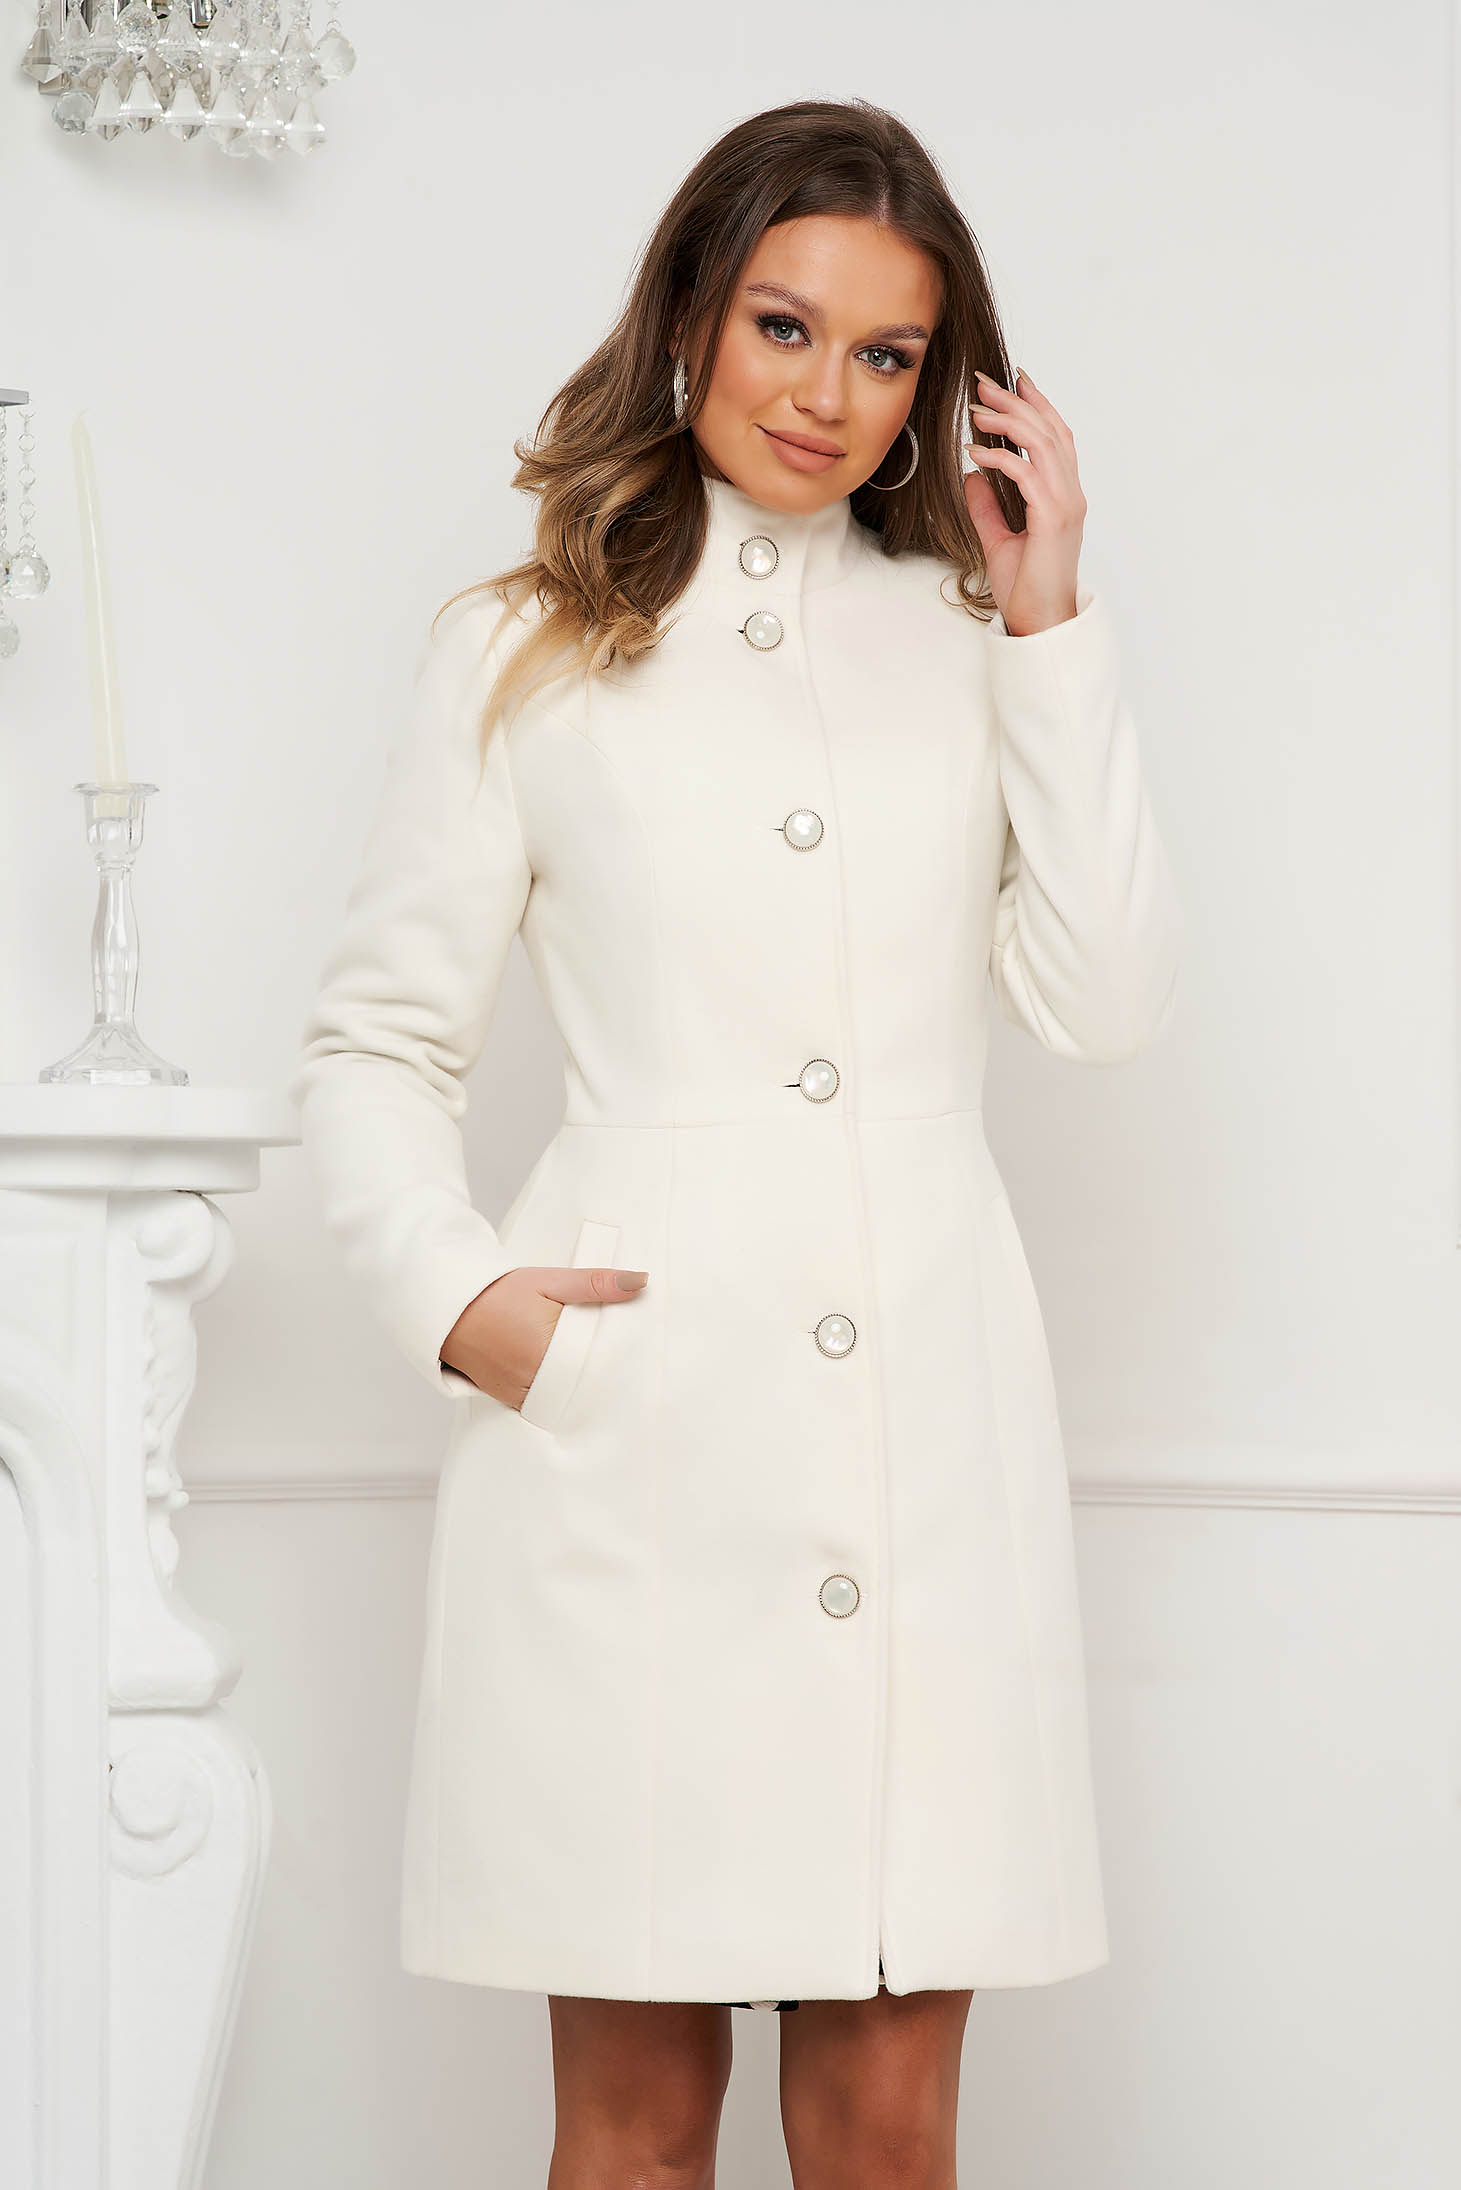 Ivory coat tented elegant soft fabric with front pockets